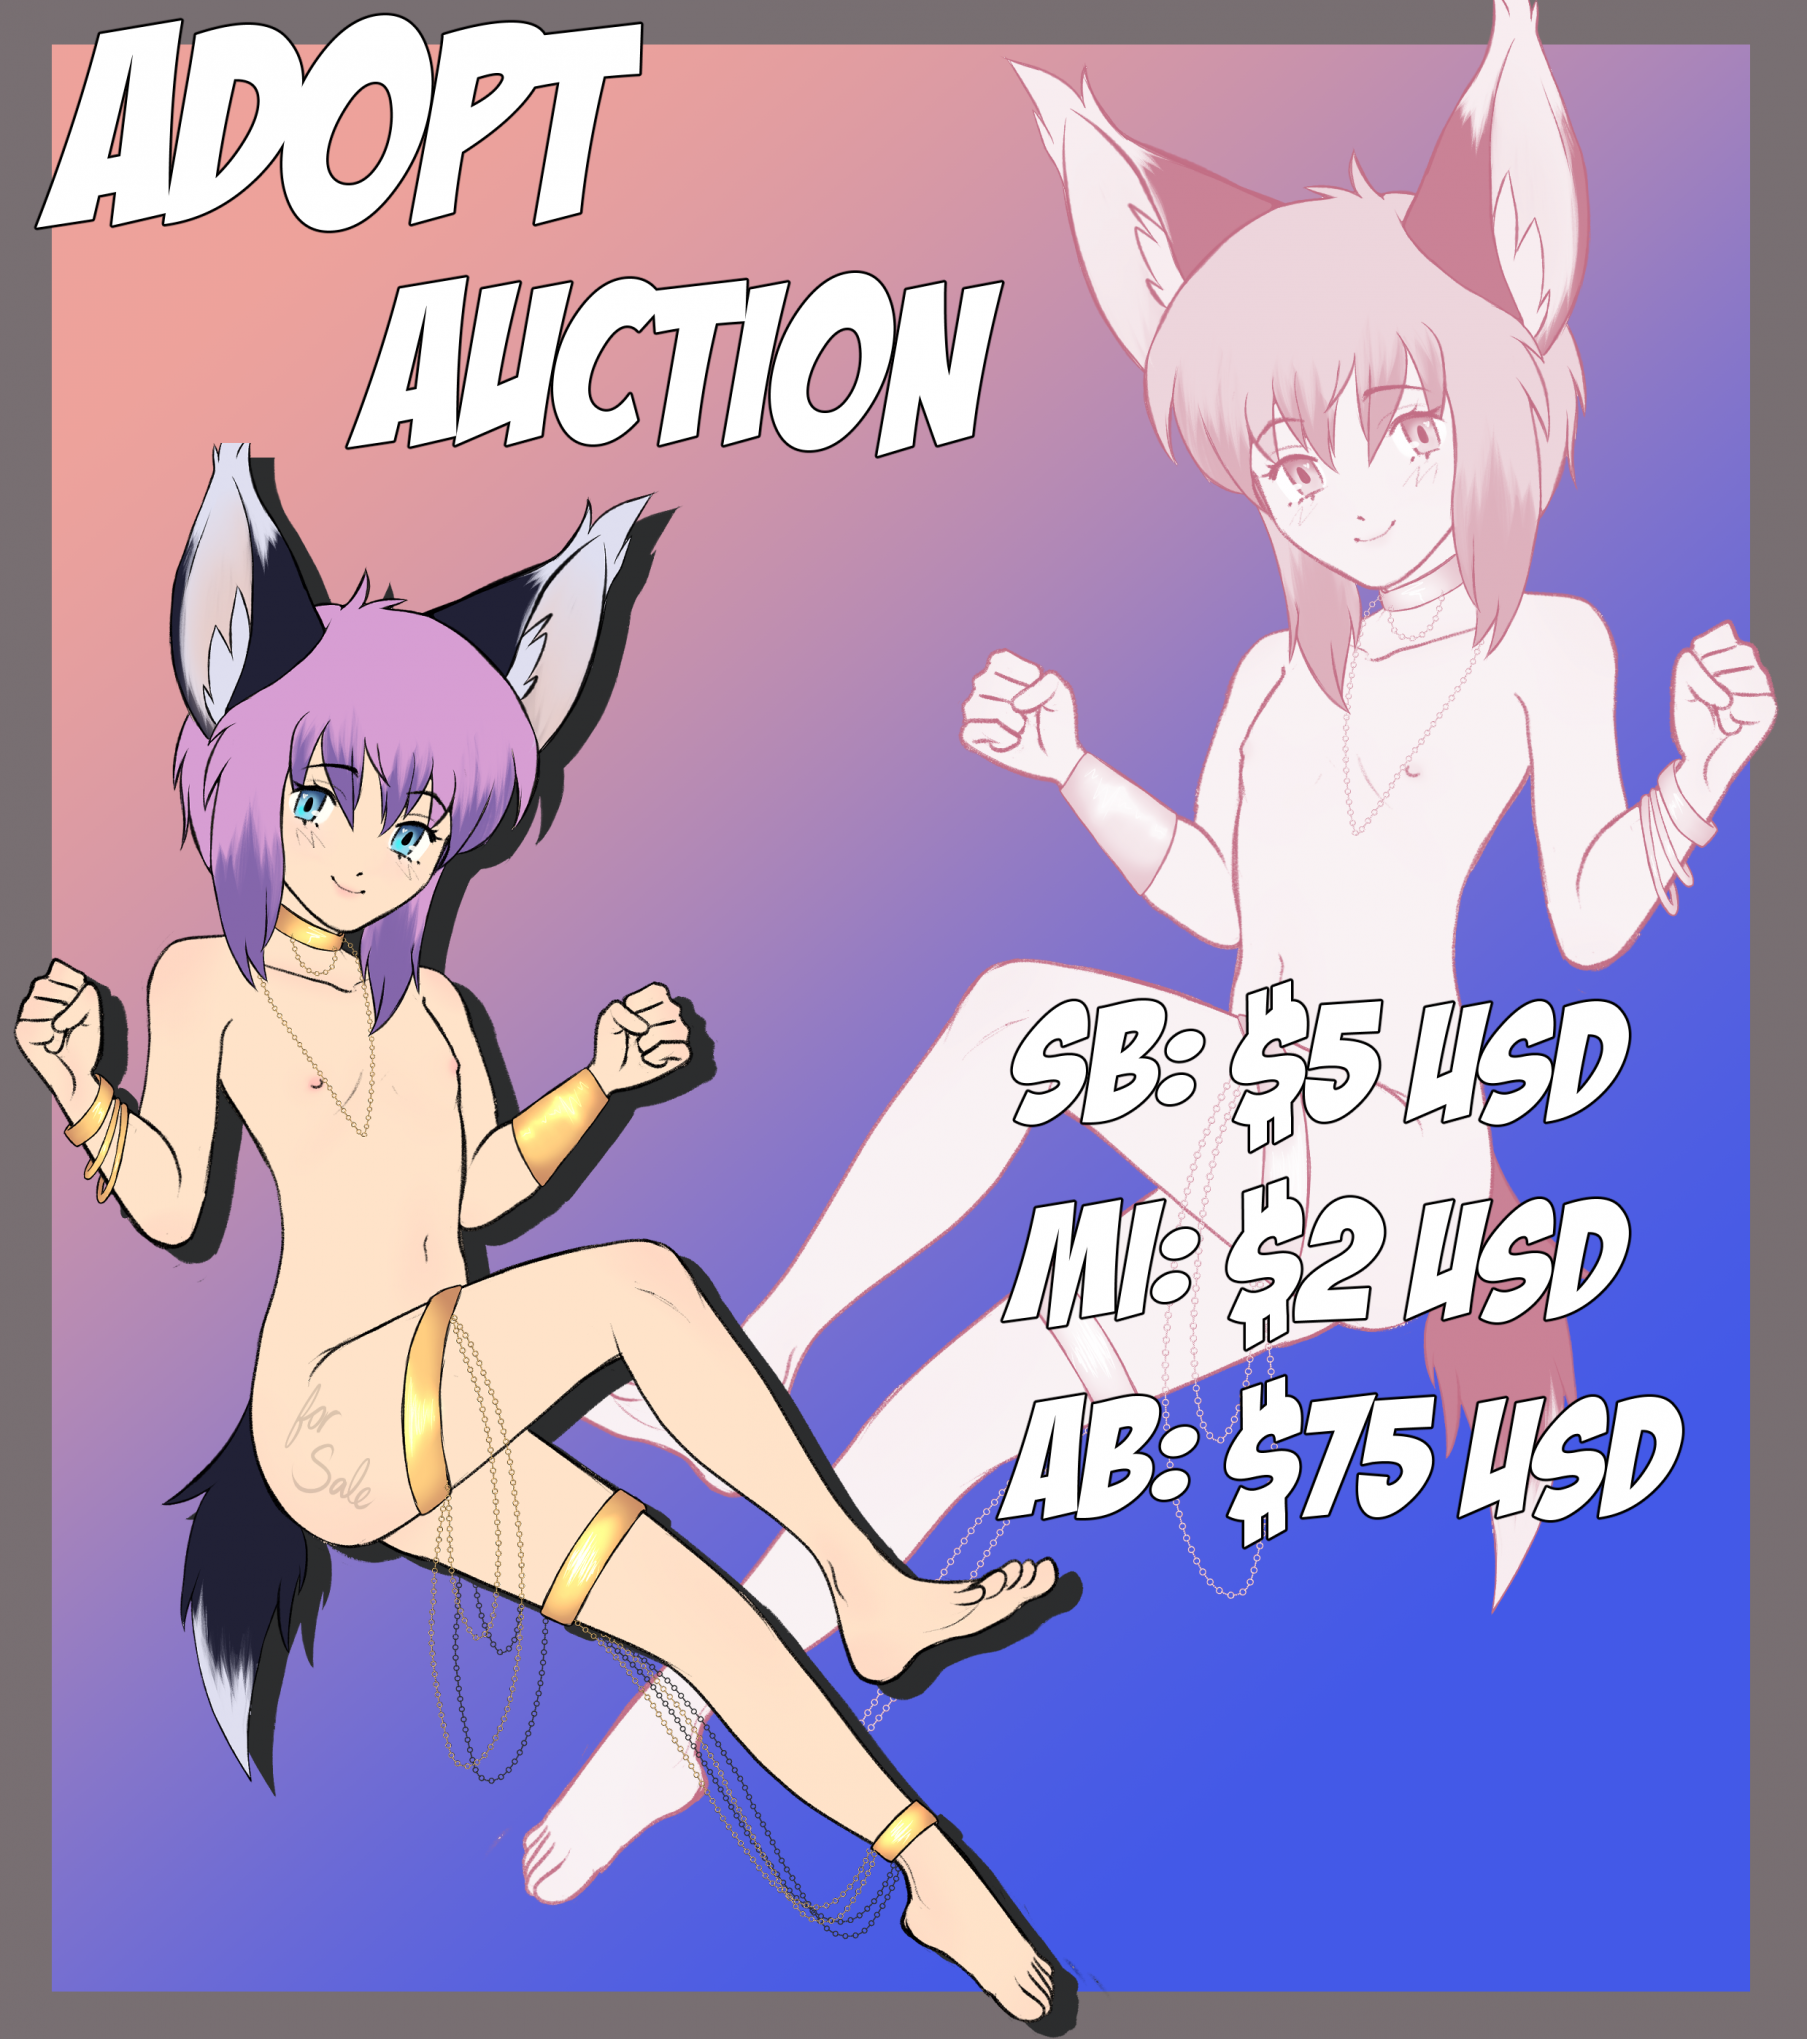 Furry Cat Girl Posters for Sale